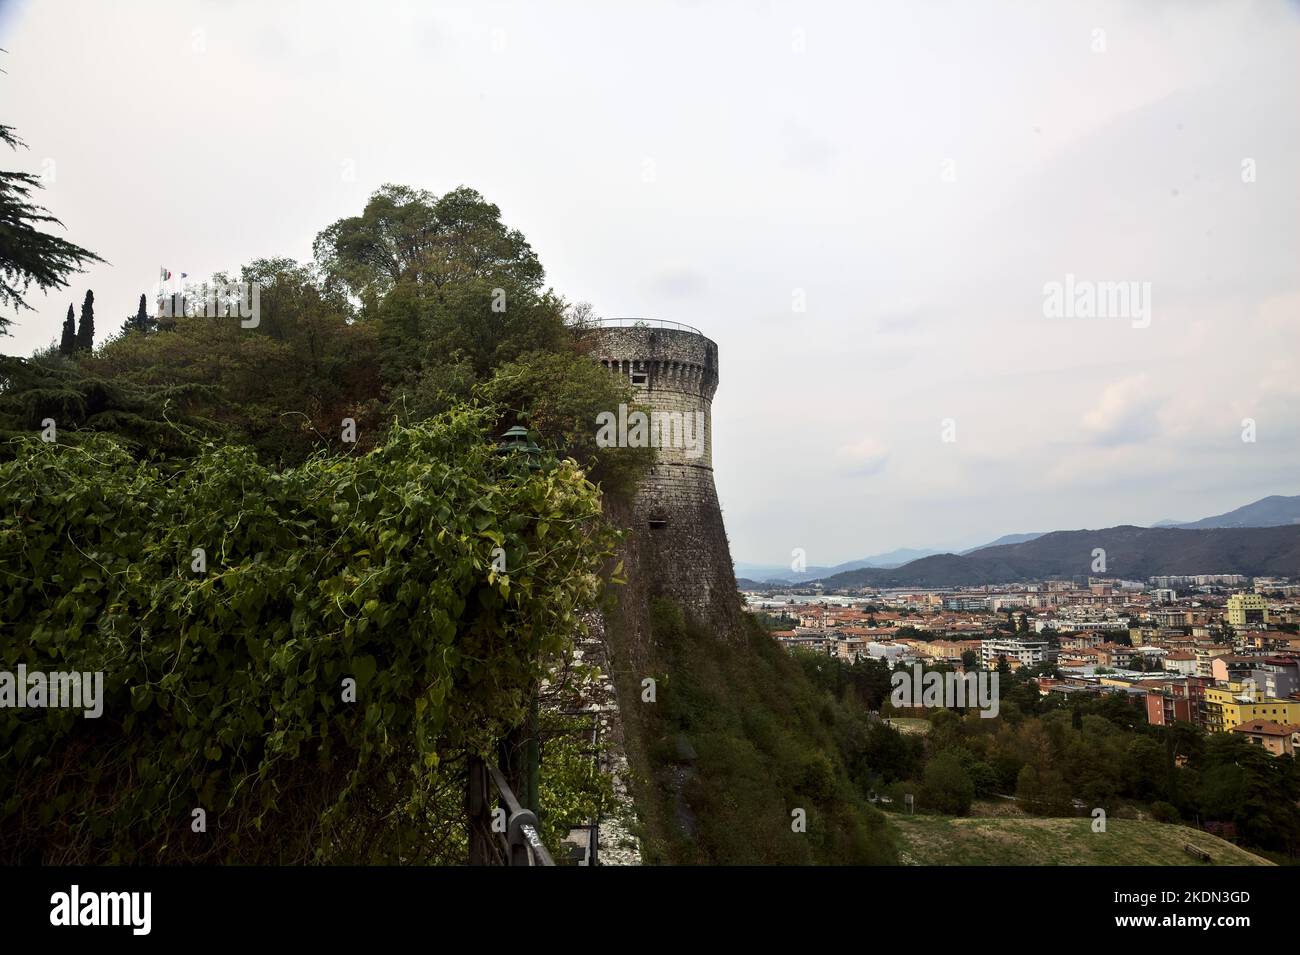 City seen from above framed by a castle built on a cliff on a cloudy day Stock Photo